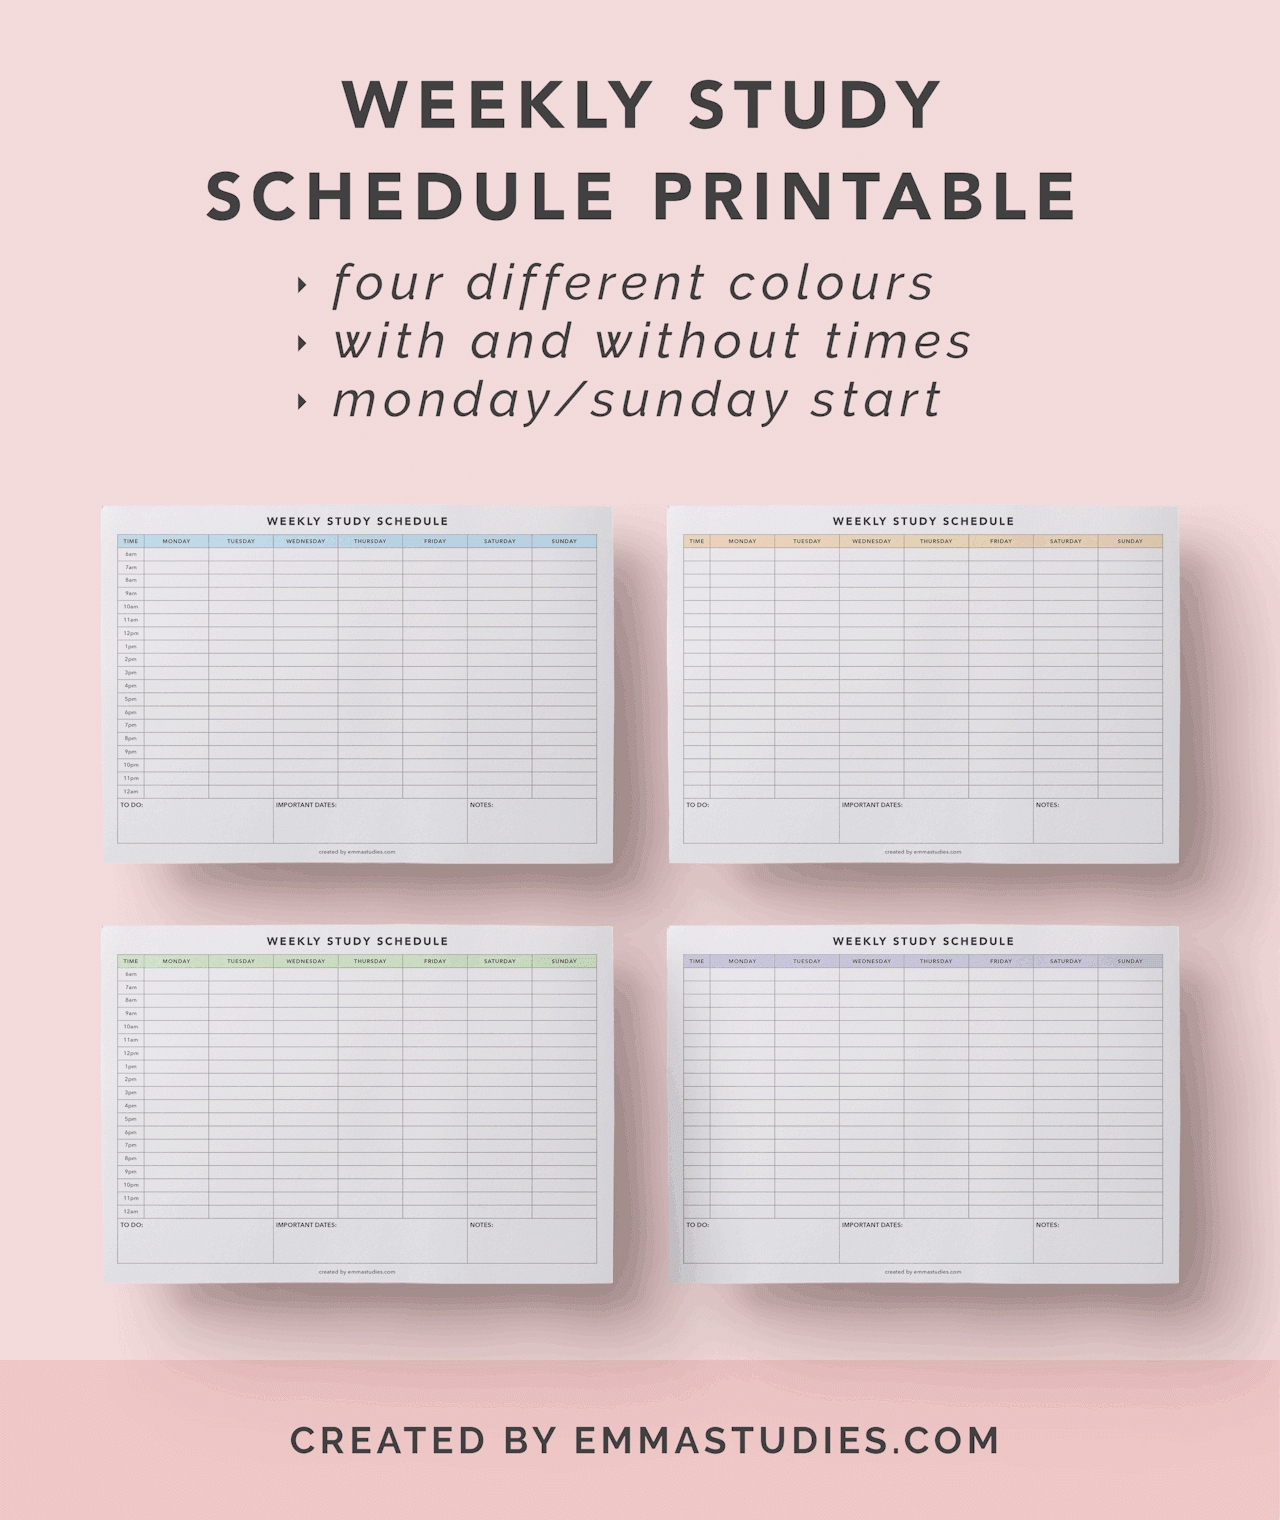 Weekly Study Schedule Printableafter Releasing My Monthly-Studying Monthly Calendar Template